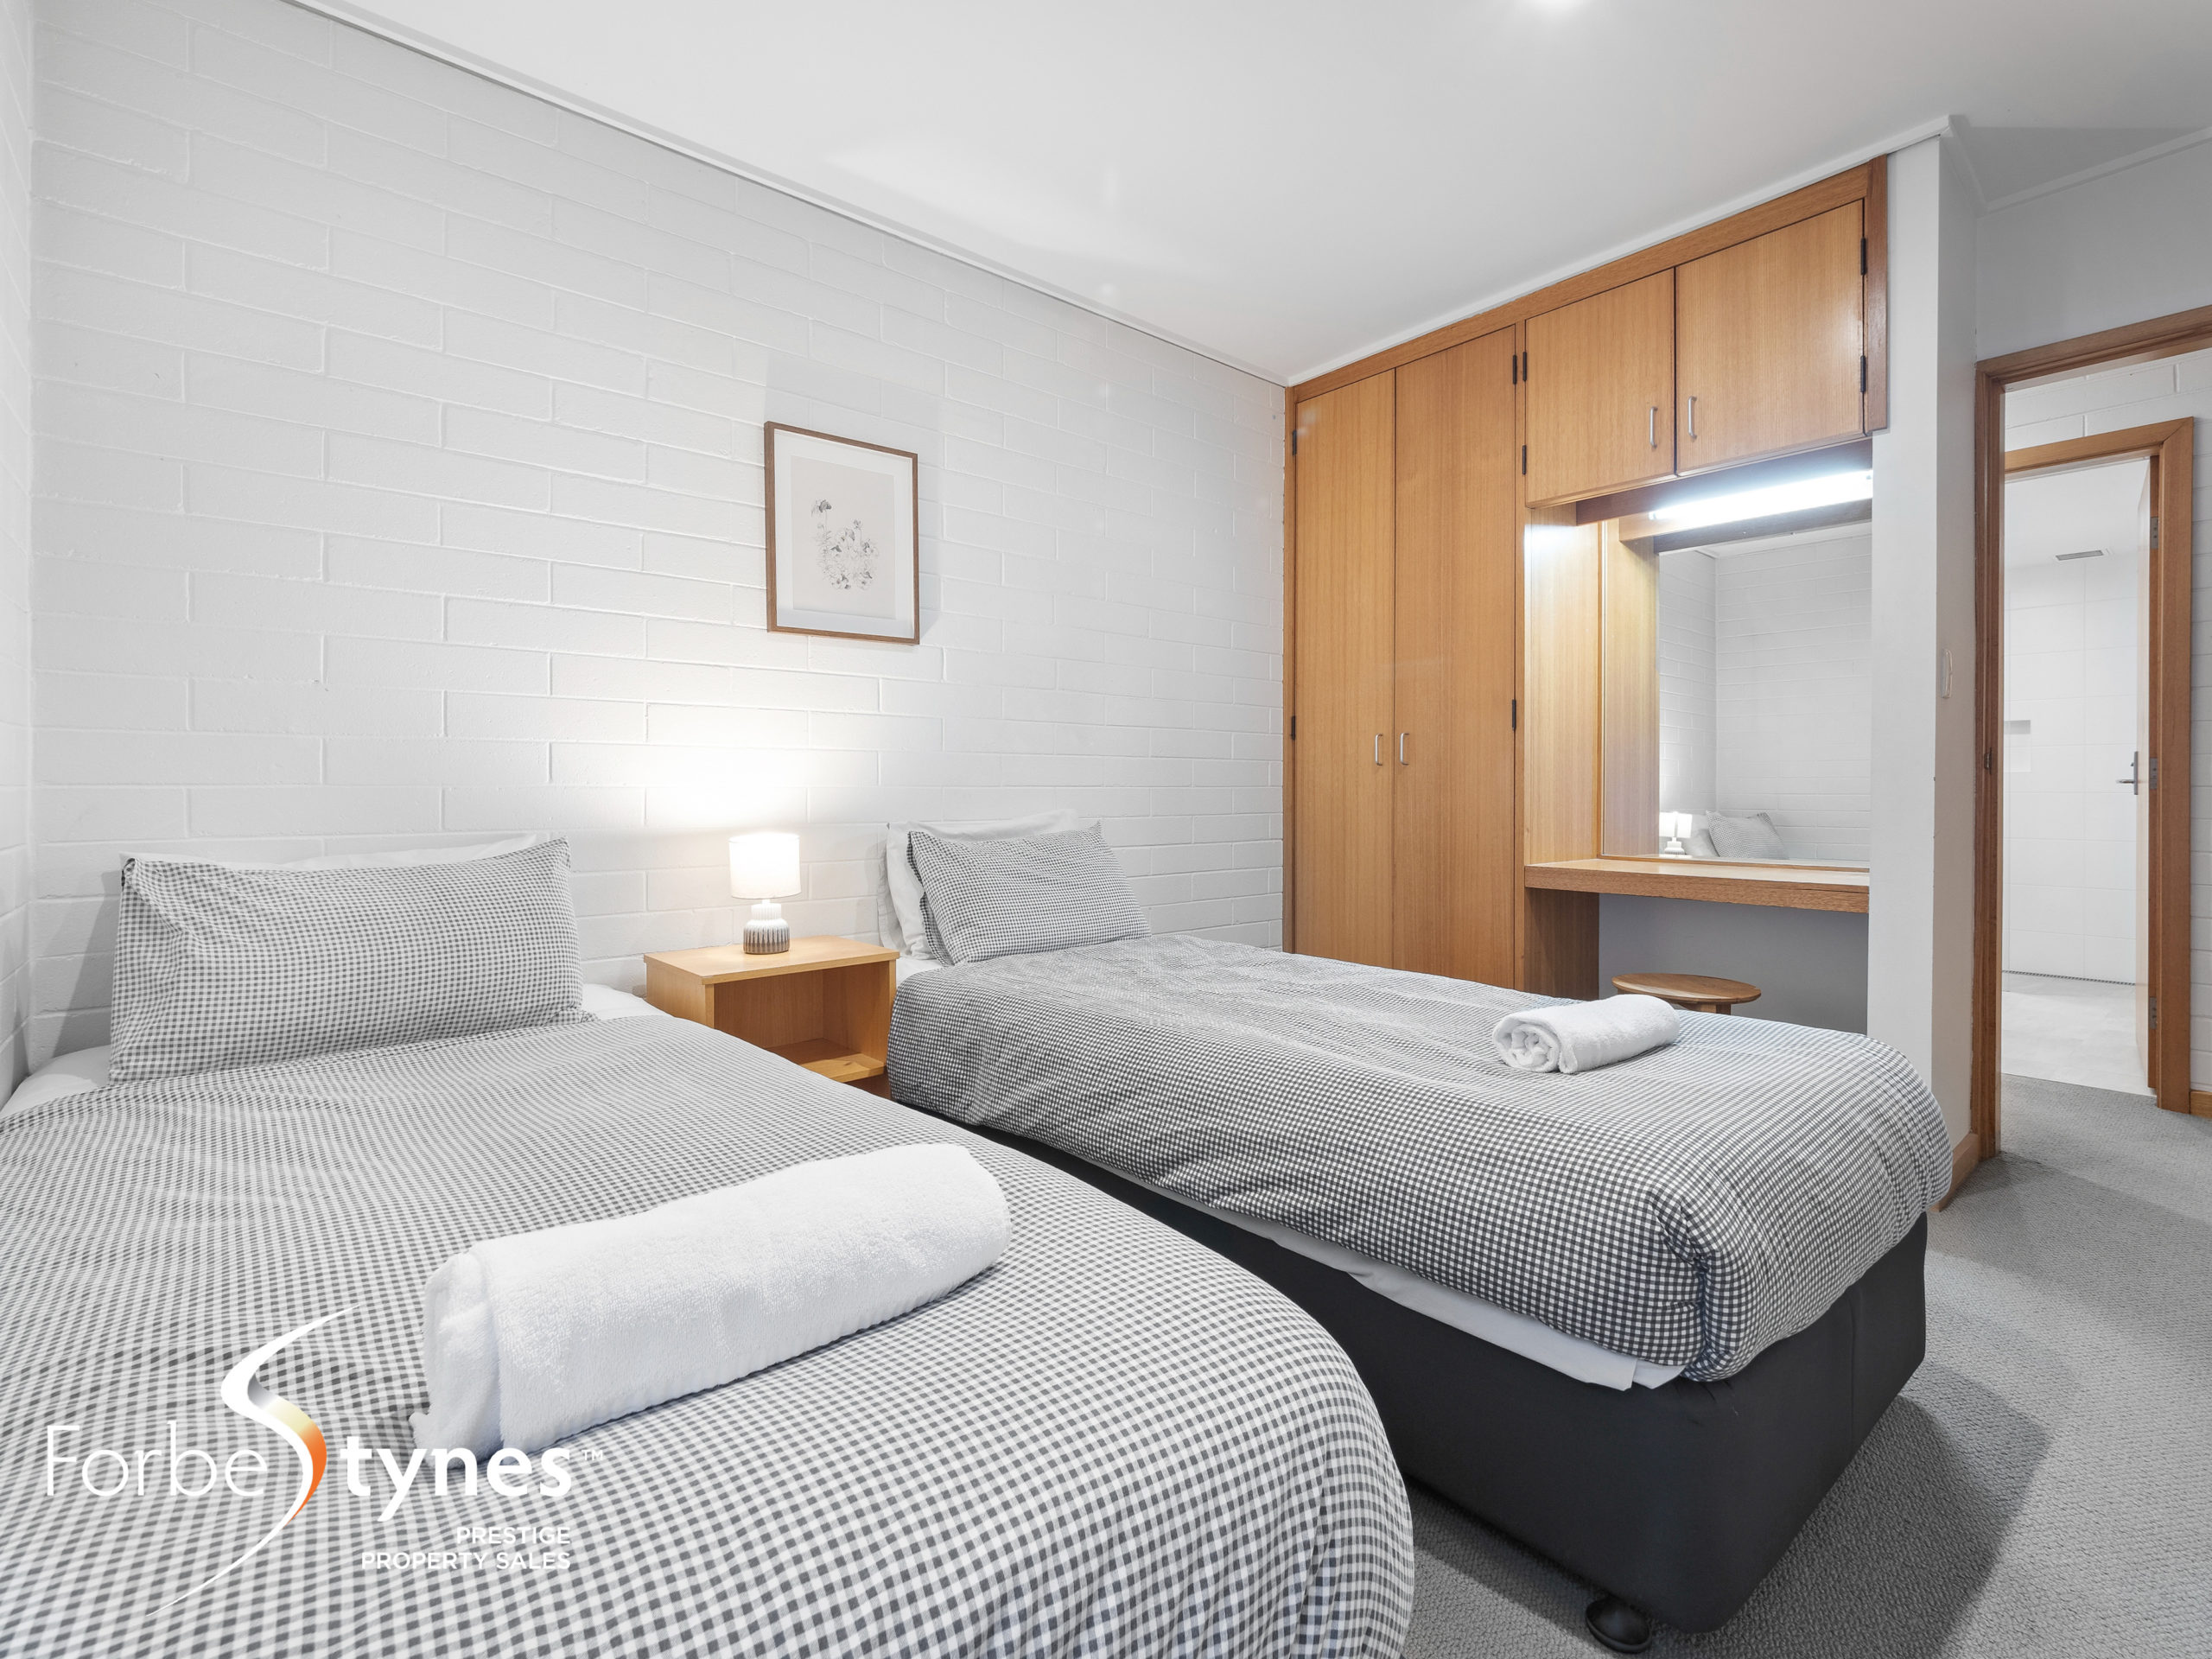 A Rare Find! Modernized Three Bedroom Thredbo Alpine Apartment – Expressions of Interest – Over $2,000,000